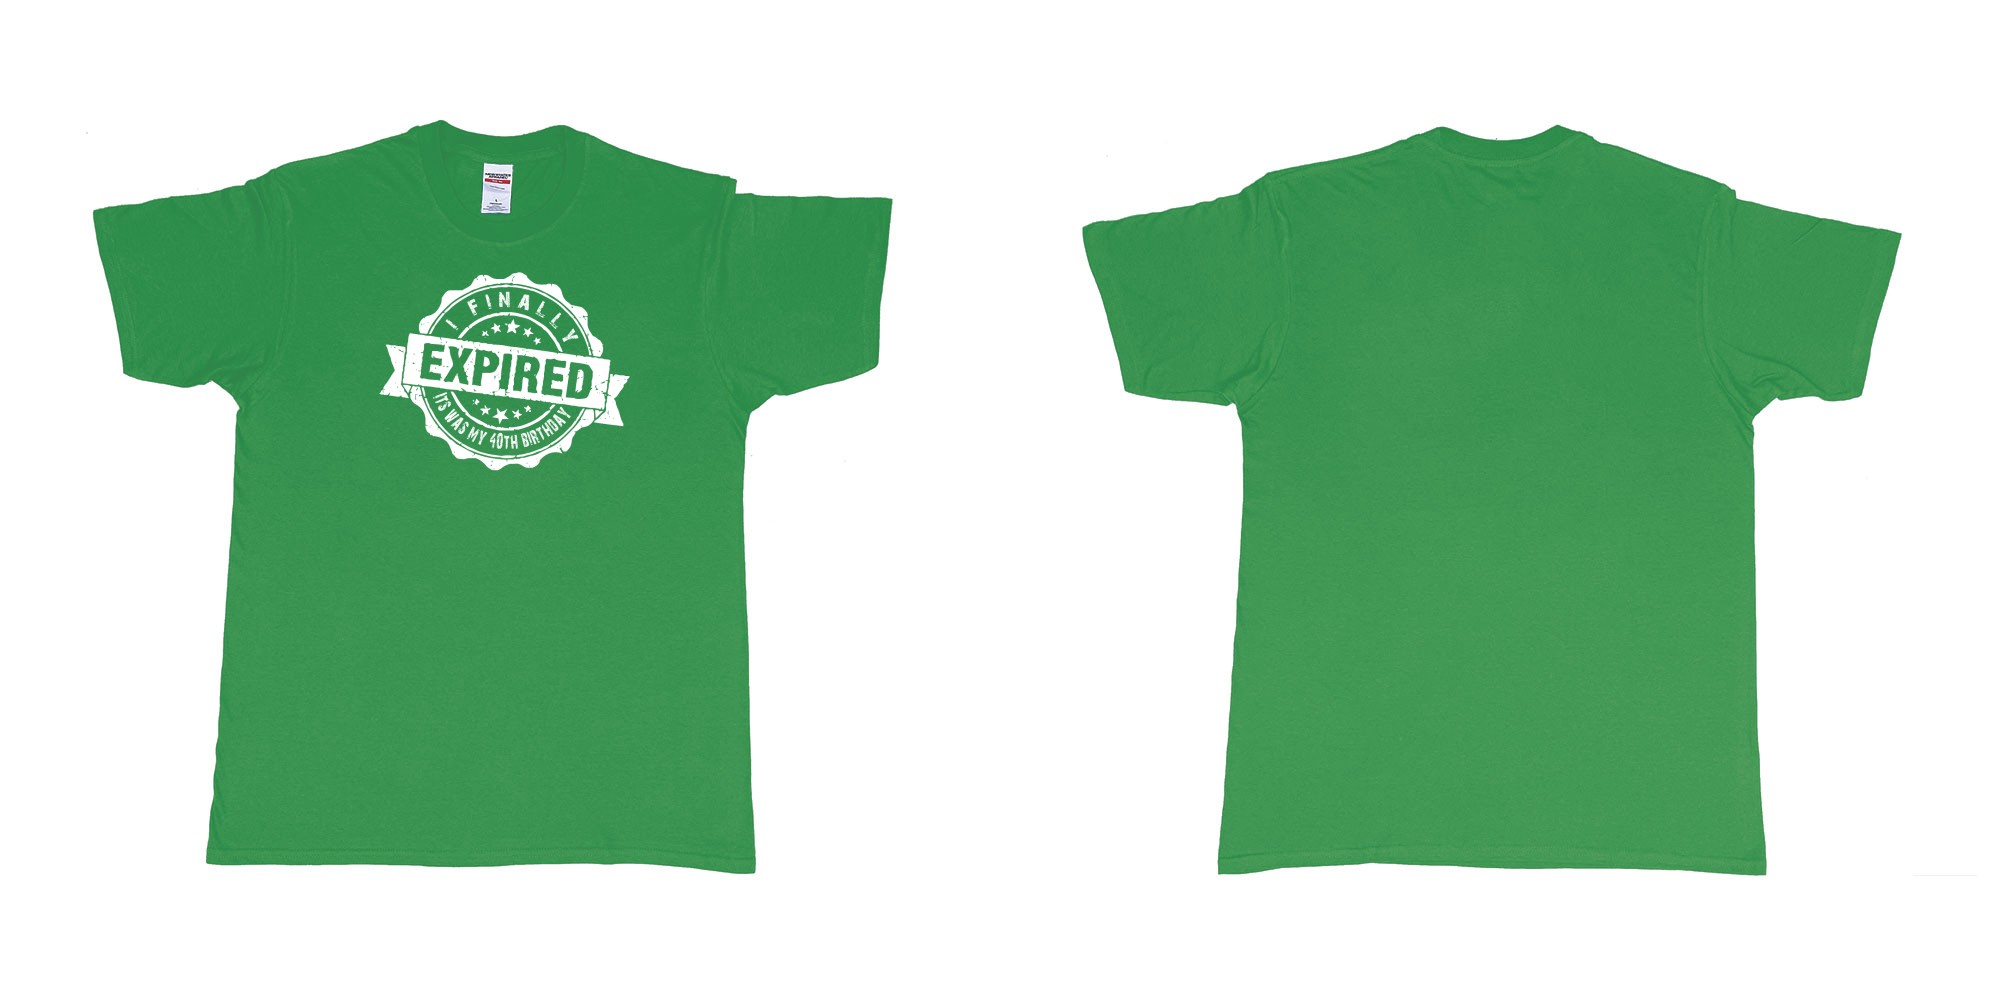 Custom tshirt design i finally expiered in fabric color irish-green choice your own text made in Bali by The Pirate Way